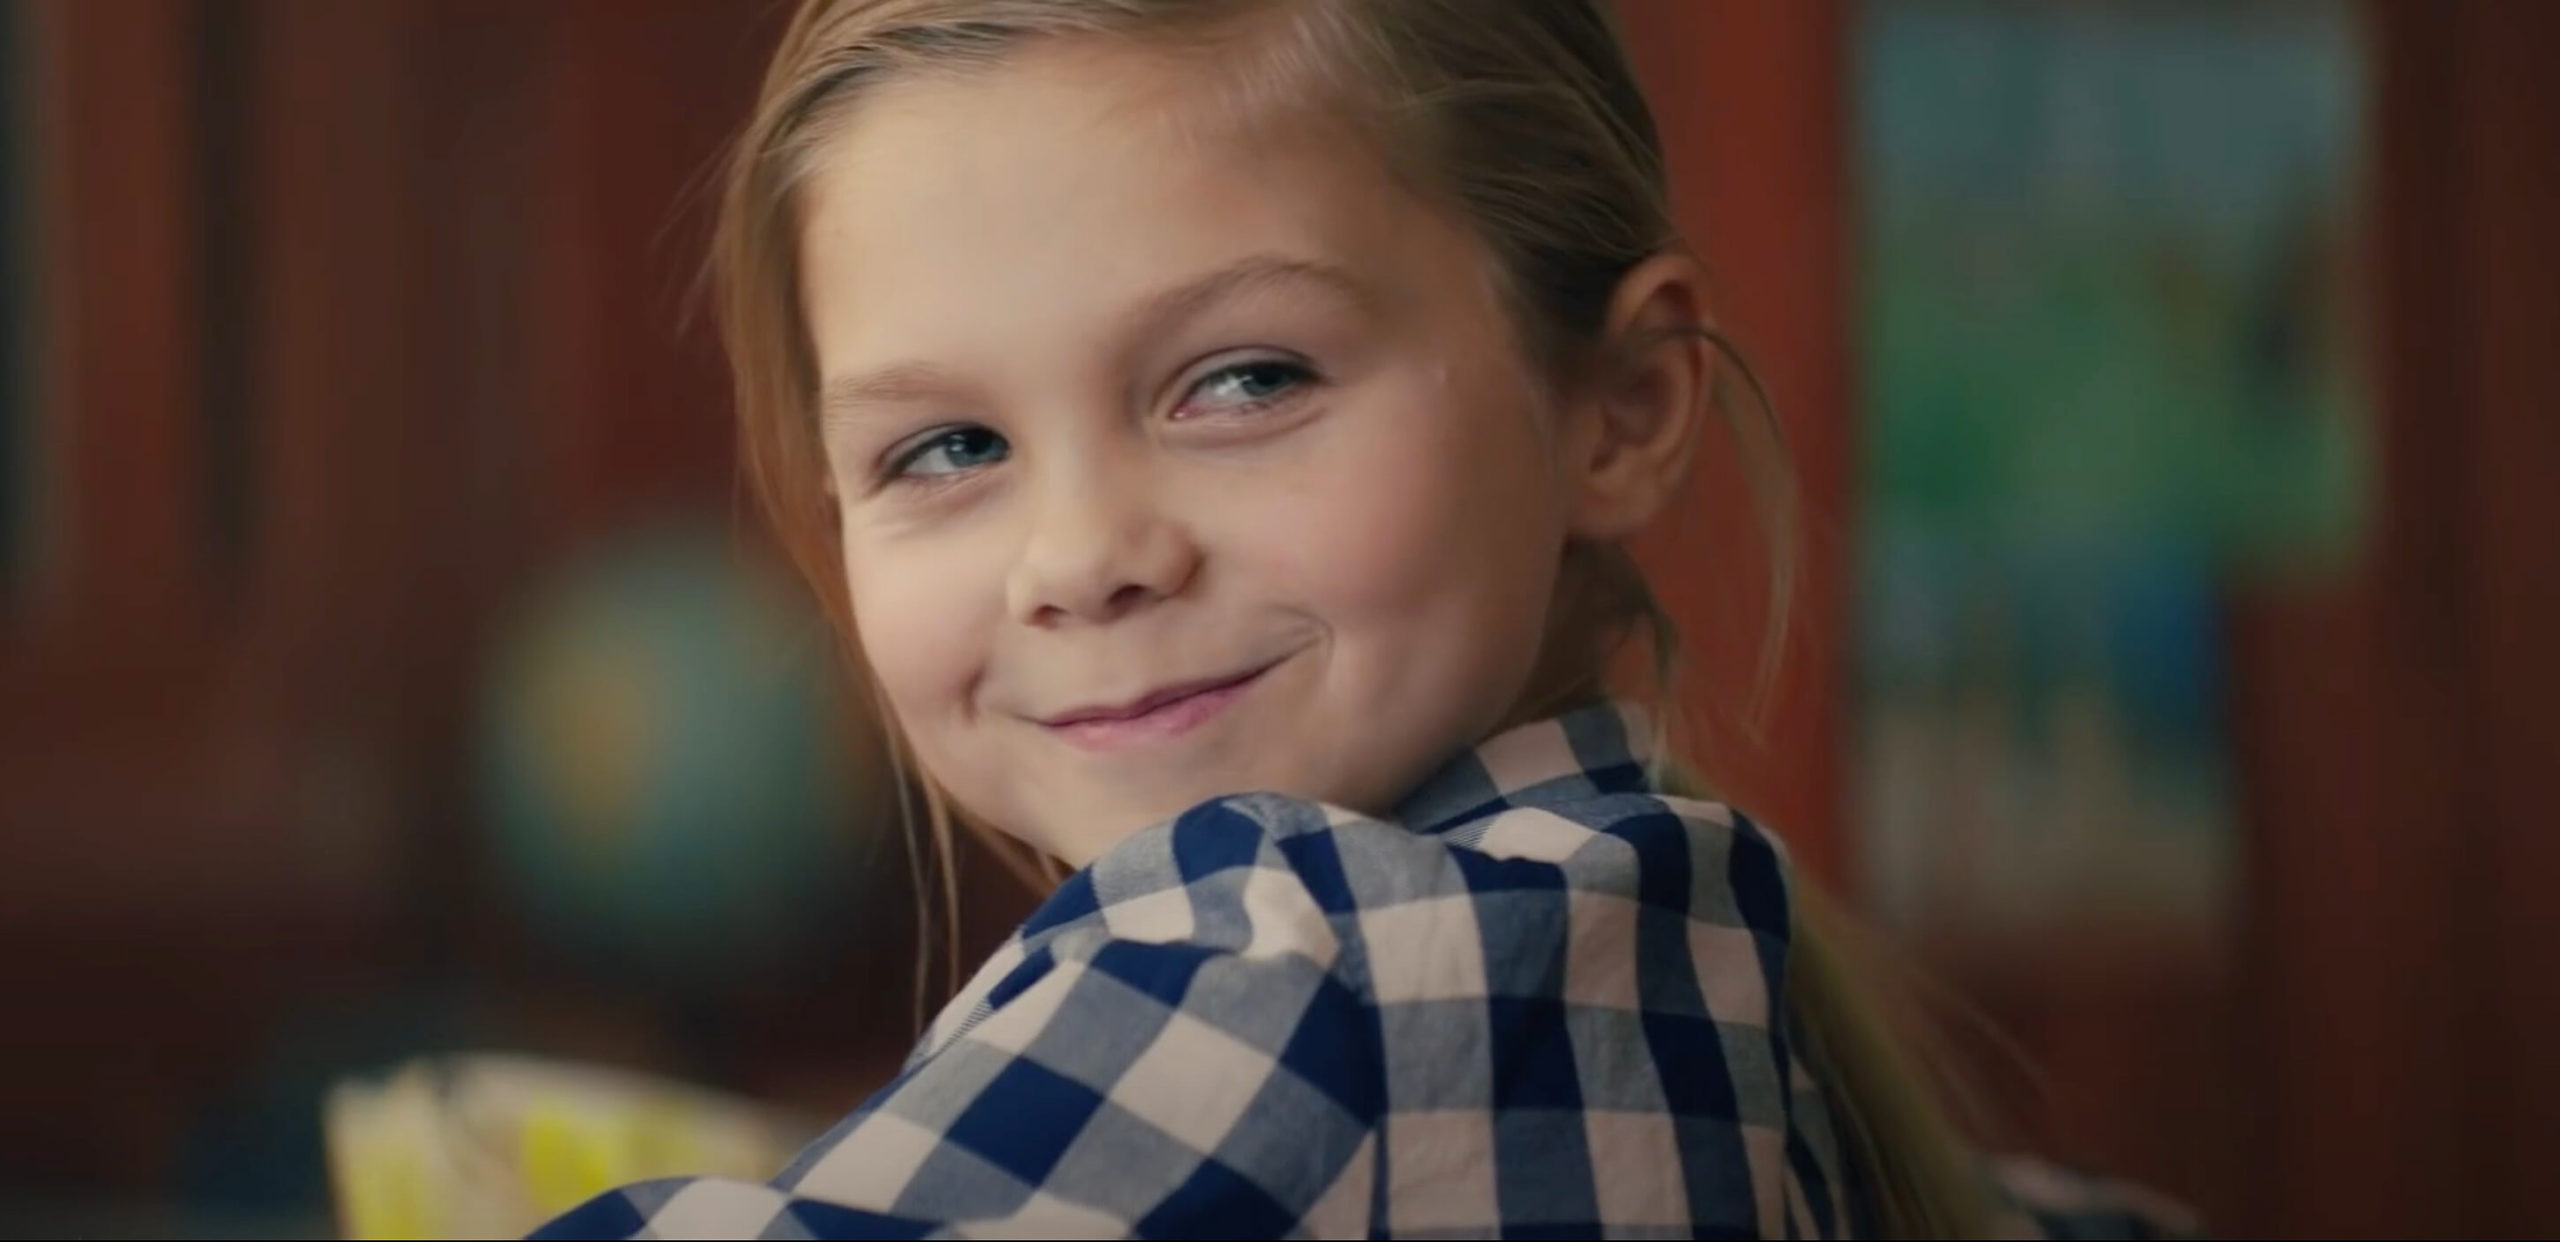 airBaltic - Let’s Be Together This Christmas